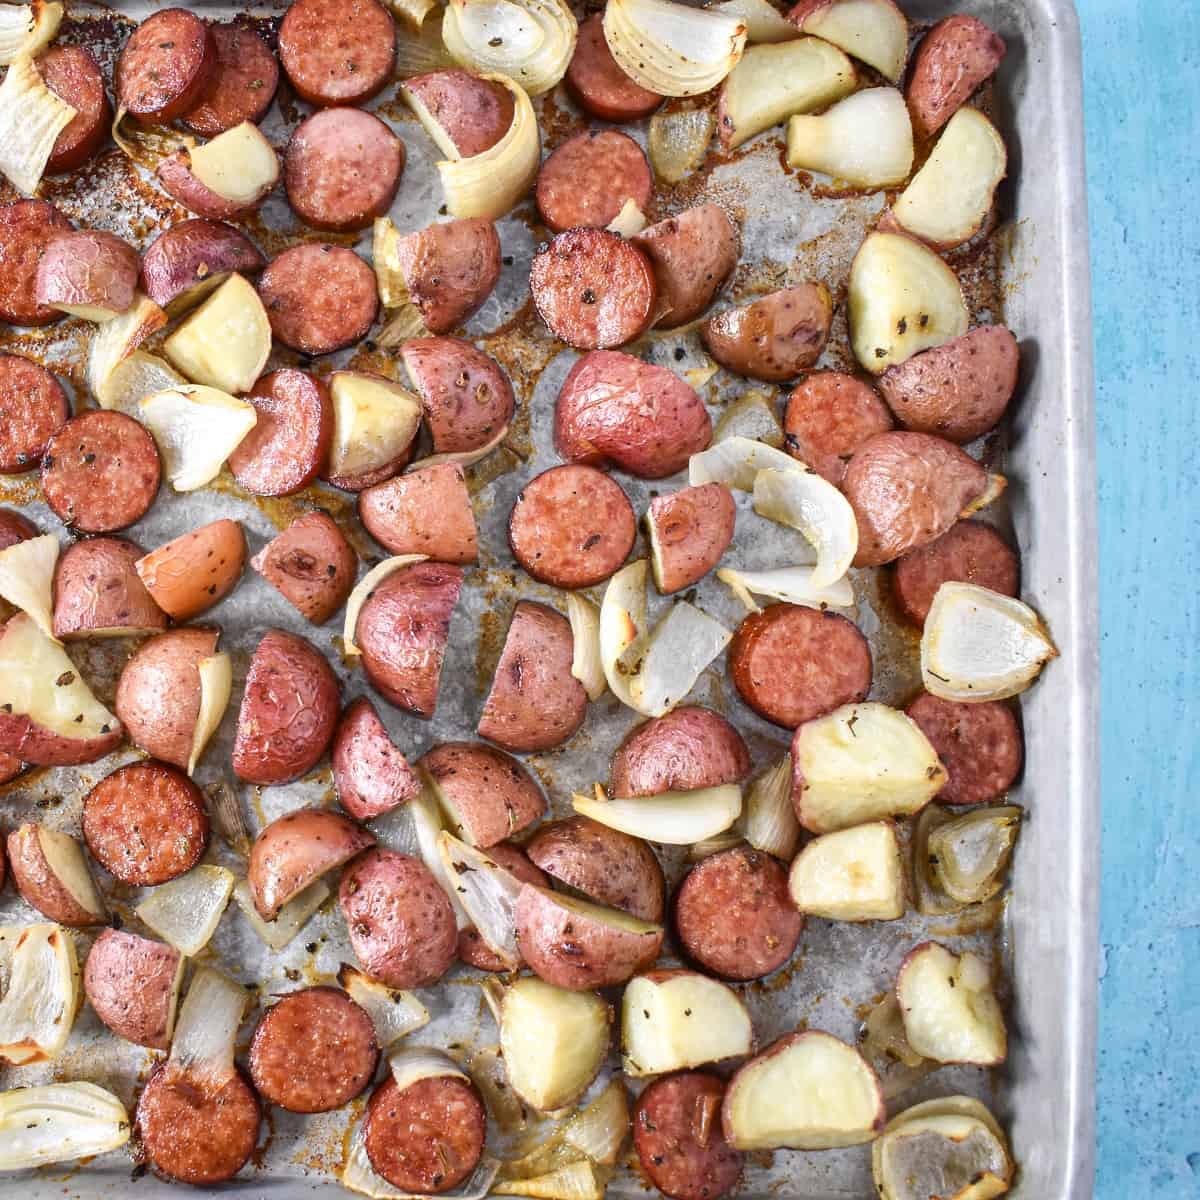 The finished sausage and potatoes on a sheet pan set on a light blue table.